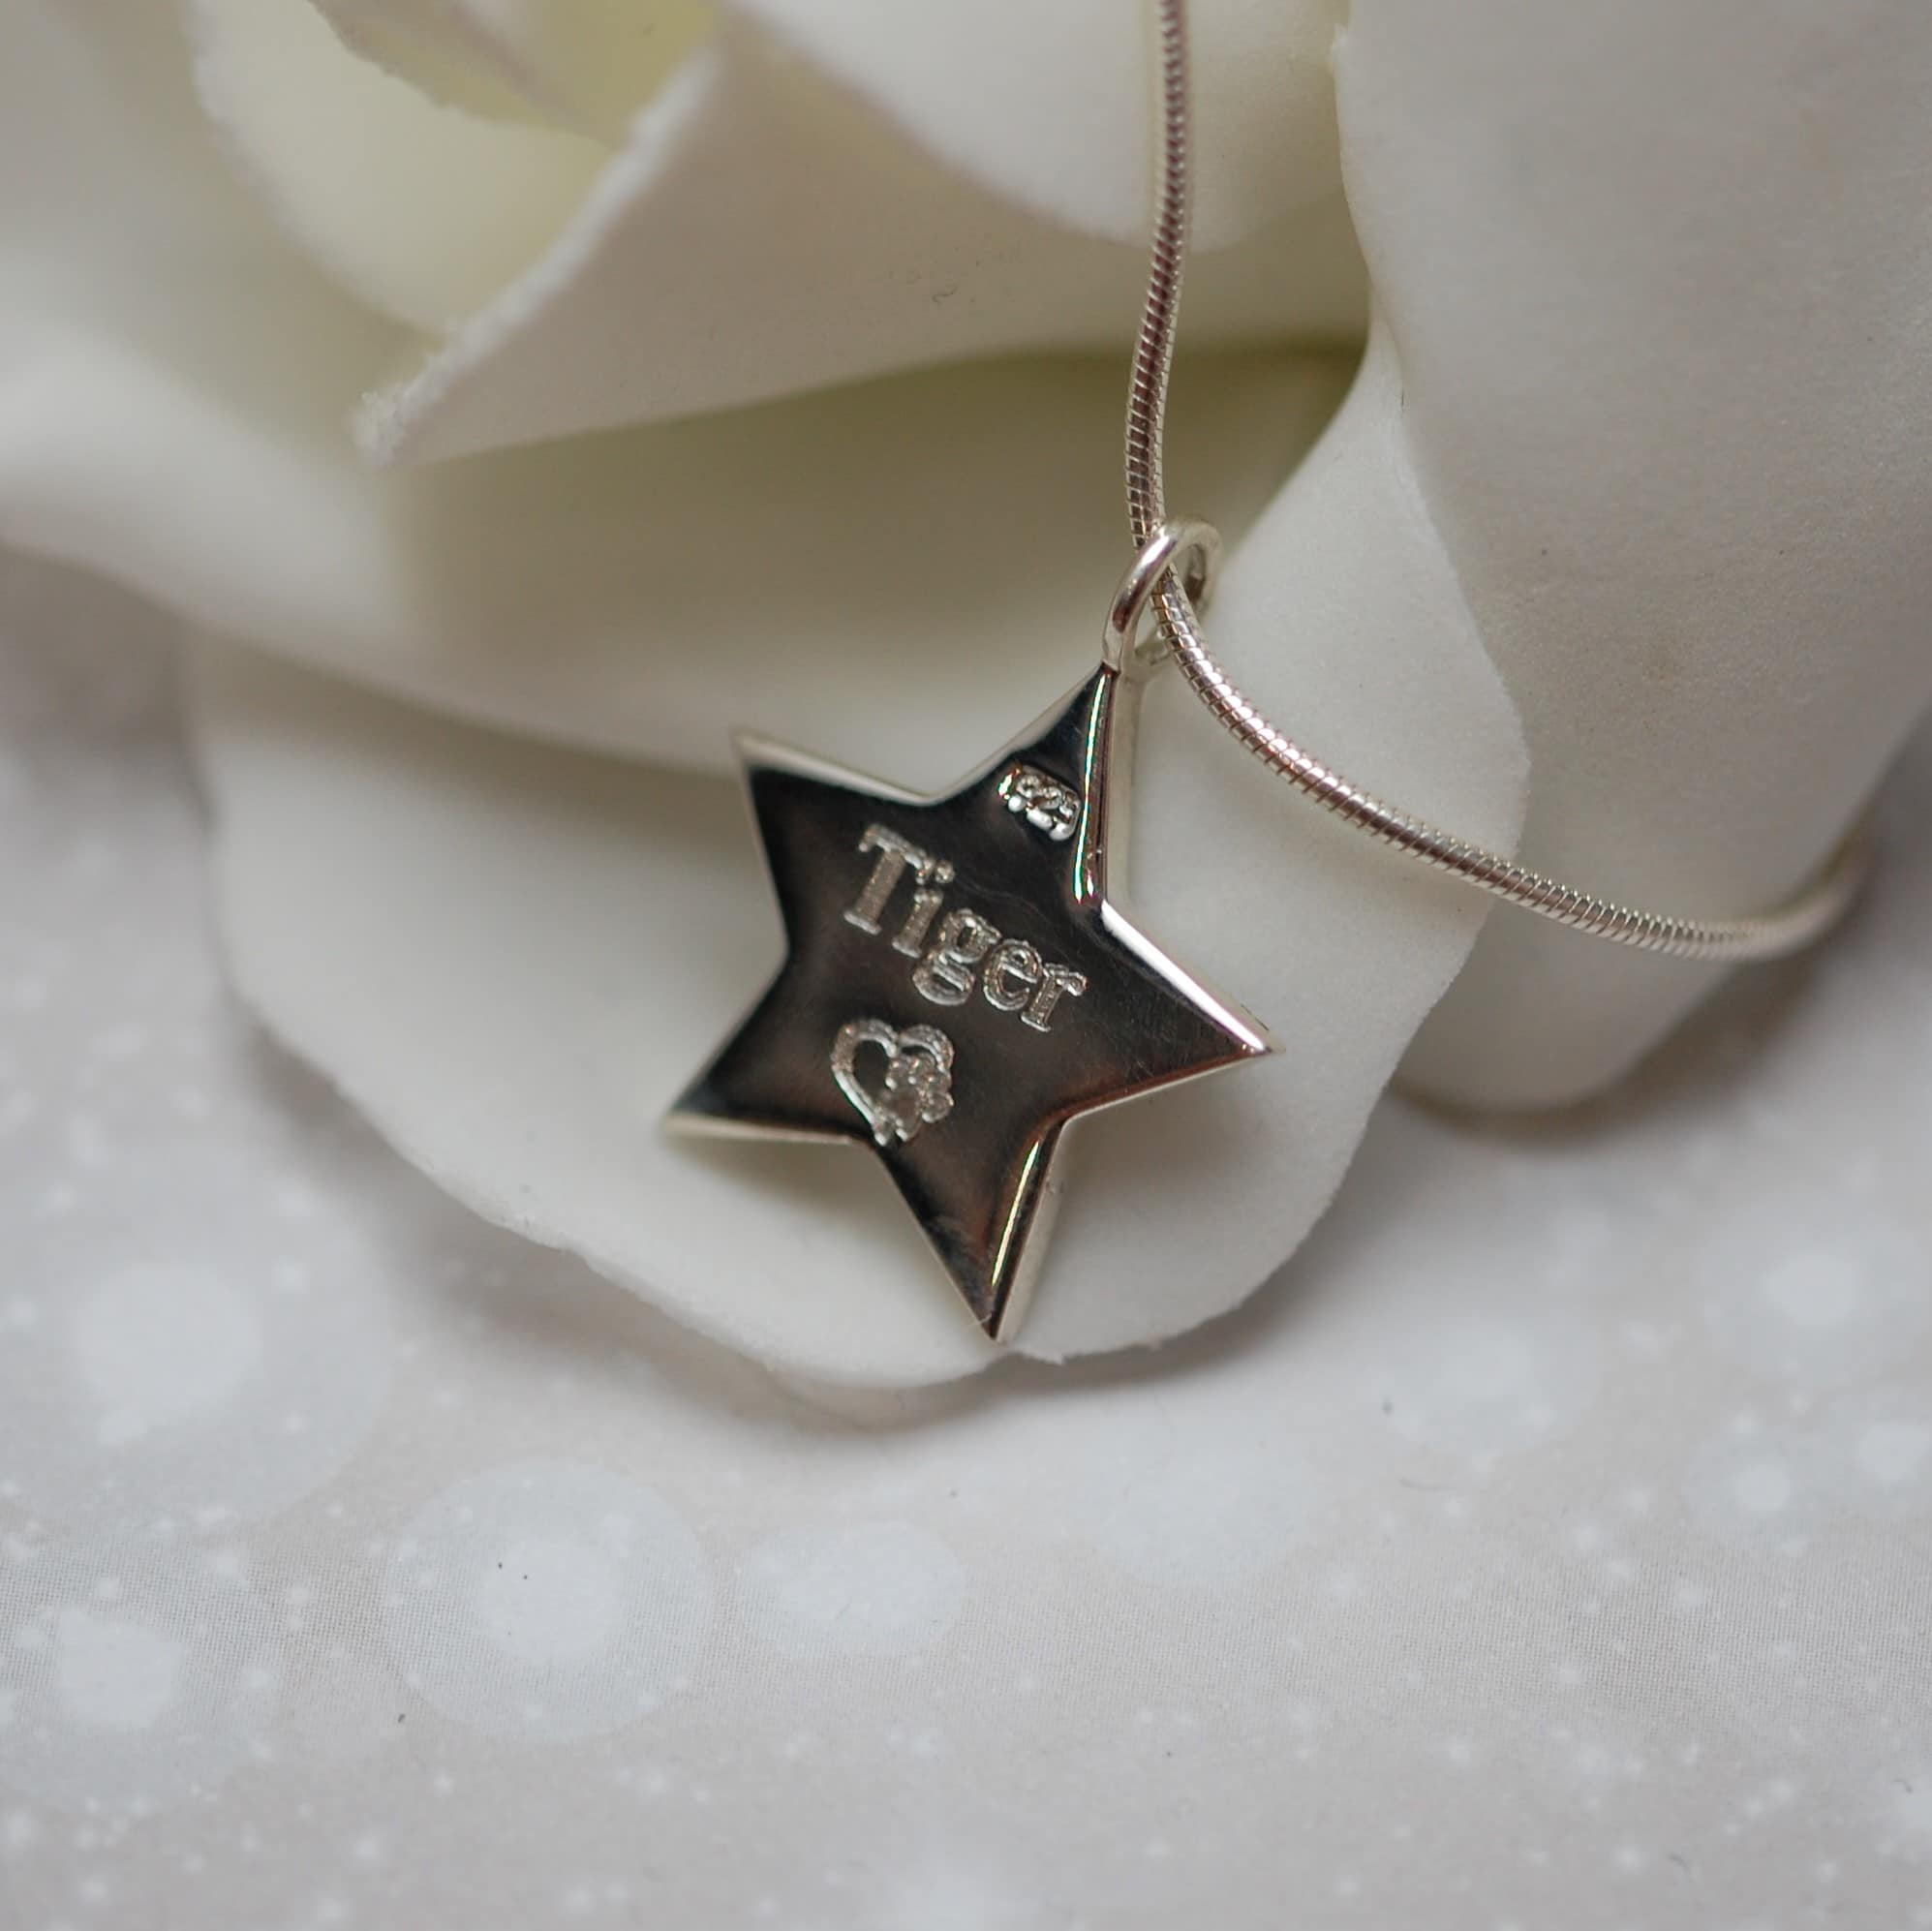 Pet name engraved on the back of silver star pendant with pet fur or cremation ashes